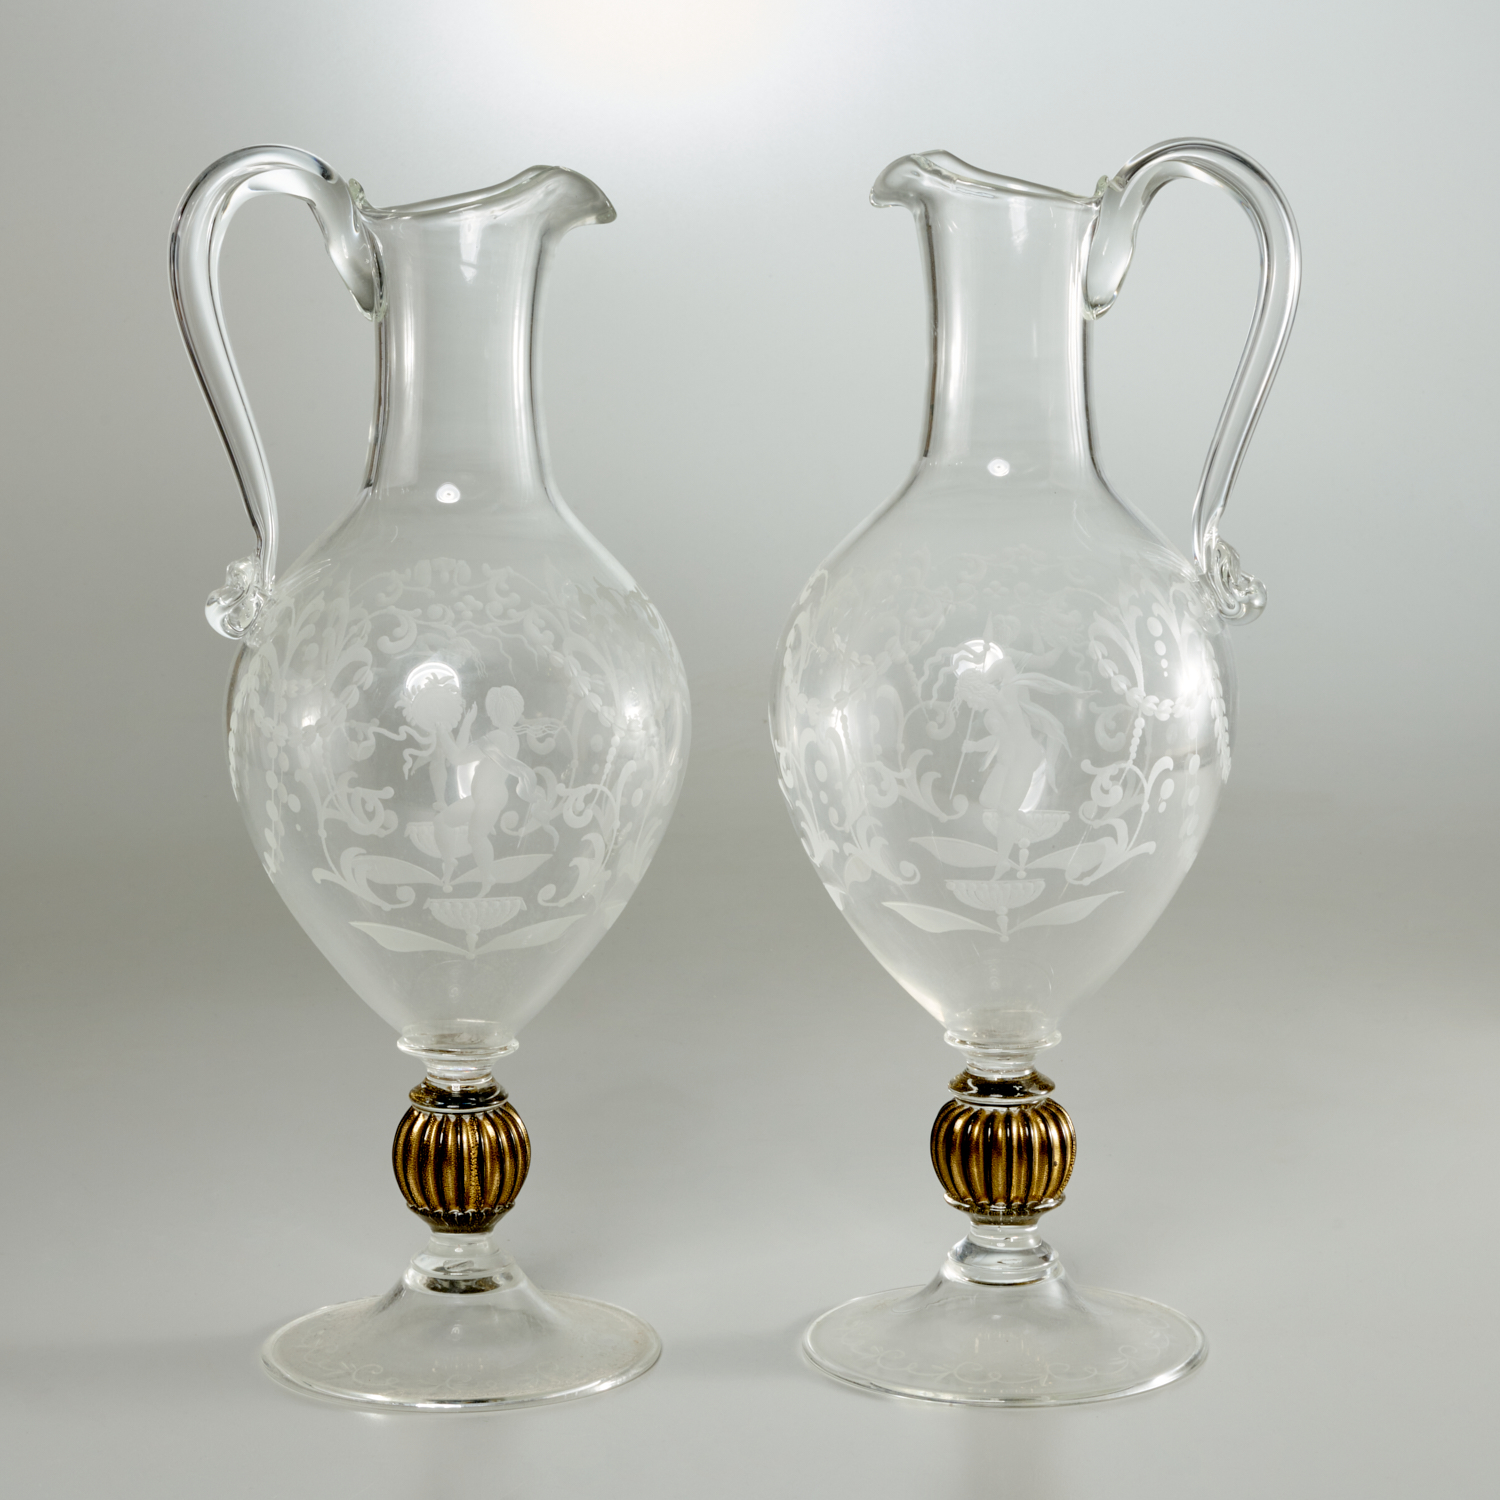 NICE PAIR ETCHED COLORLESS GLASS 3616c4